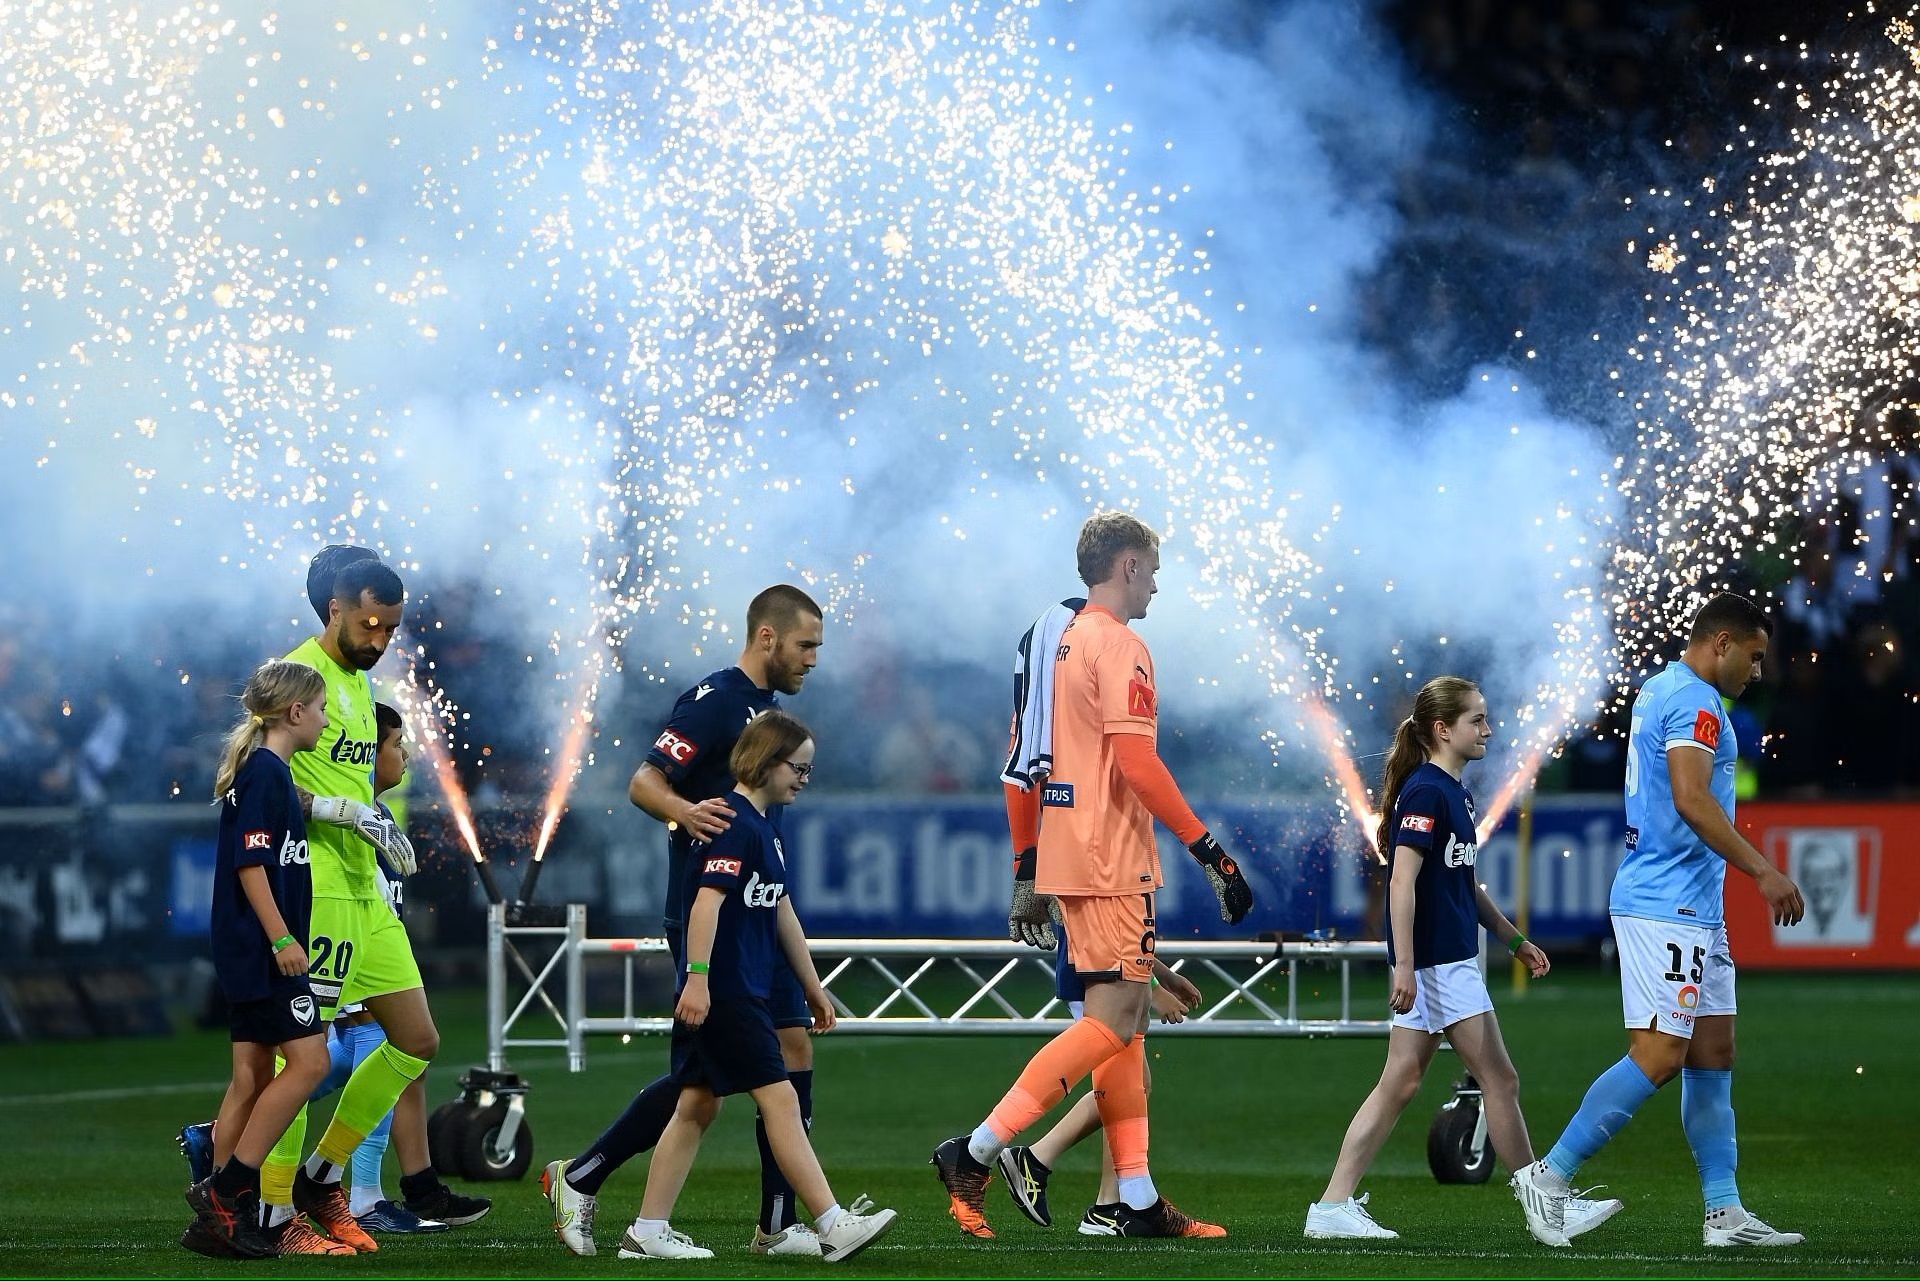 Melbourne Victory FC vs Melbourne City FC Prediction, Betting Tips & Odds | 18 FEBRUARY, 2023